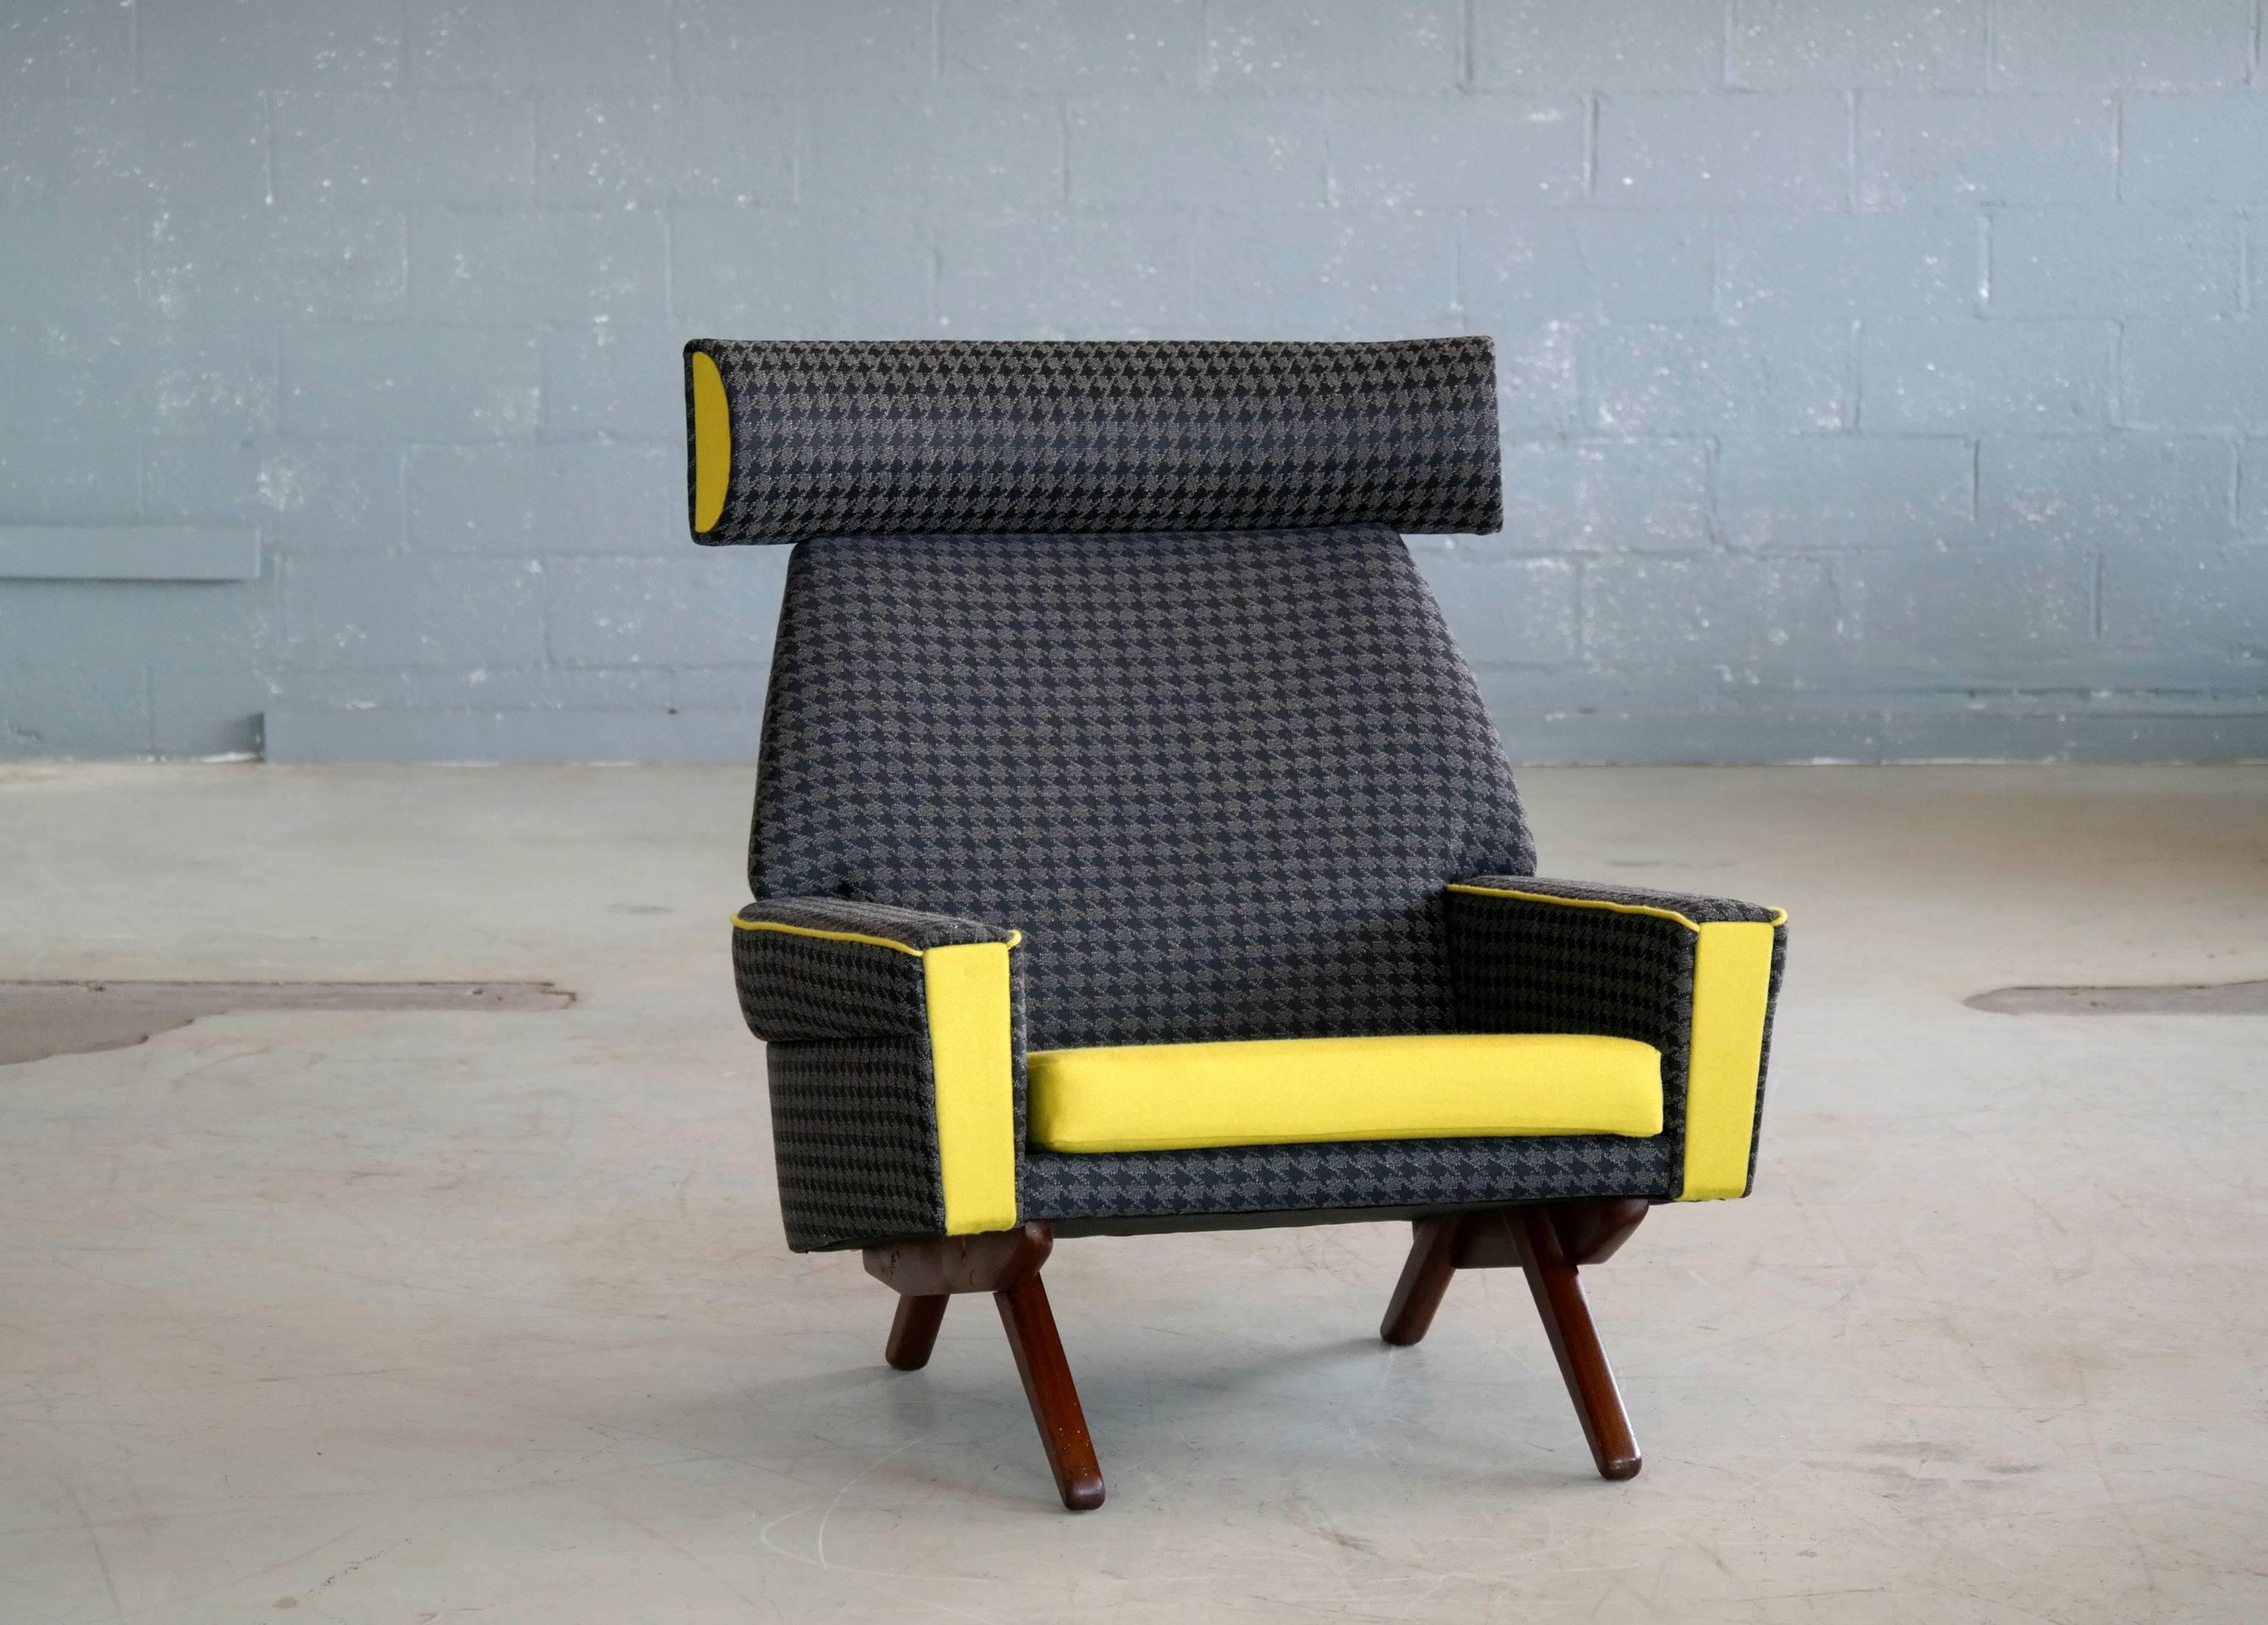 This rare chair was designed in the early 1960s by Leif Hansen and manufactured by Kronen which was a short-lived manufacturer of Danish high quality midcentury Furniture producing mainly designs by Leif Hansen. Newly upholstered in houndstooth